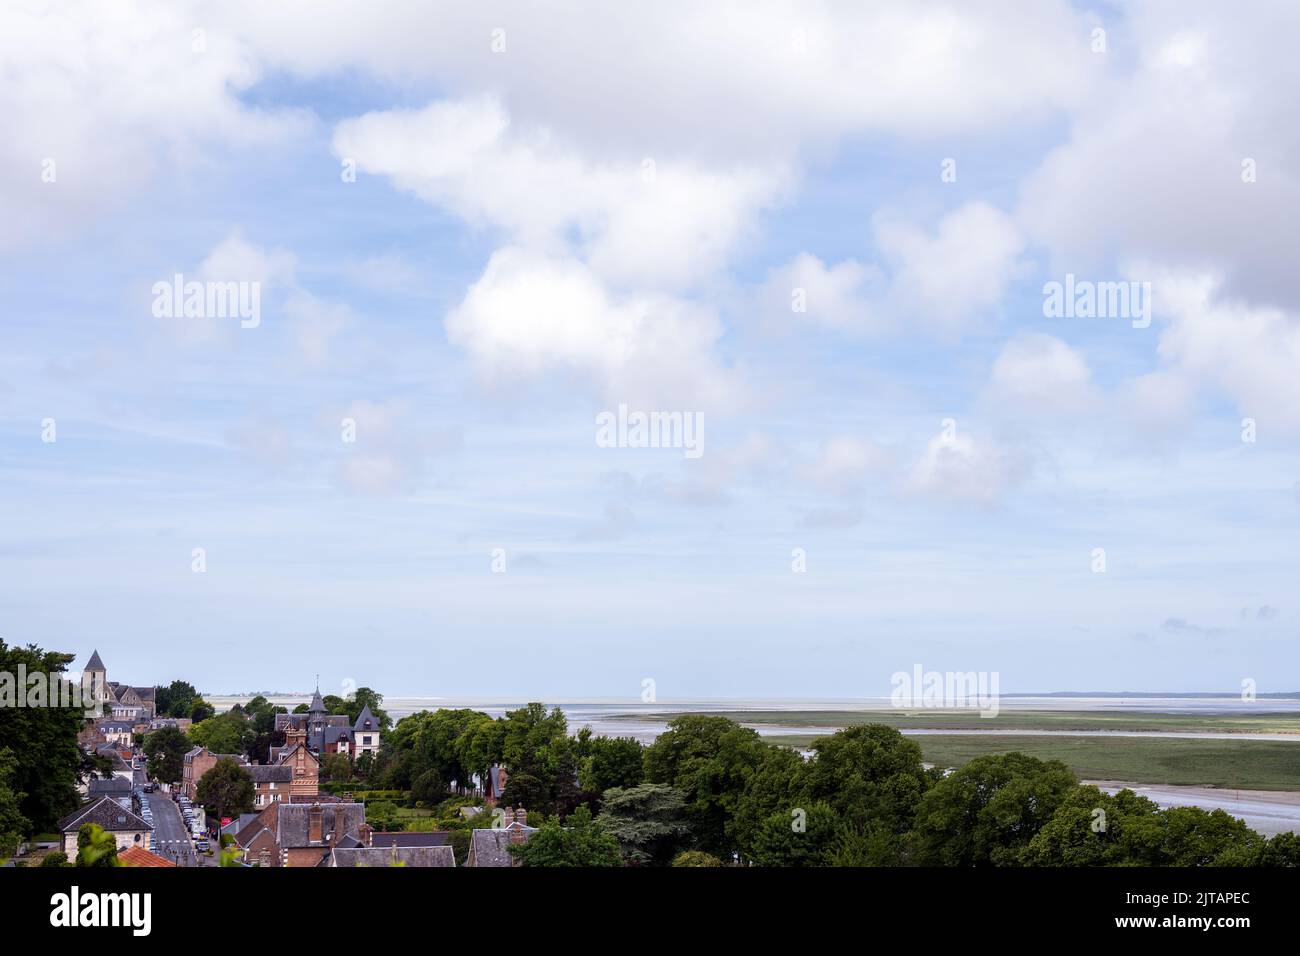 SAINT-VALERY-SUR-SOMME, fRANCE - MAY 26th, 2022: View of Saint-Valéry-sur-Somme and the Somme Bay on a cloudy spring day, Normandy, France Stock Photo